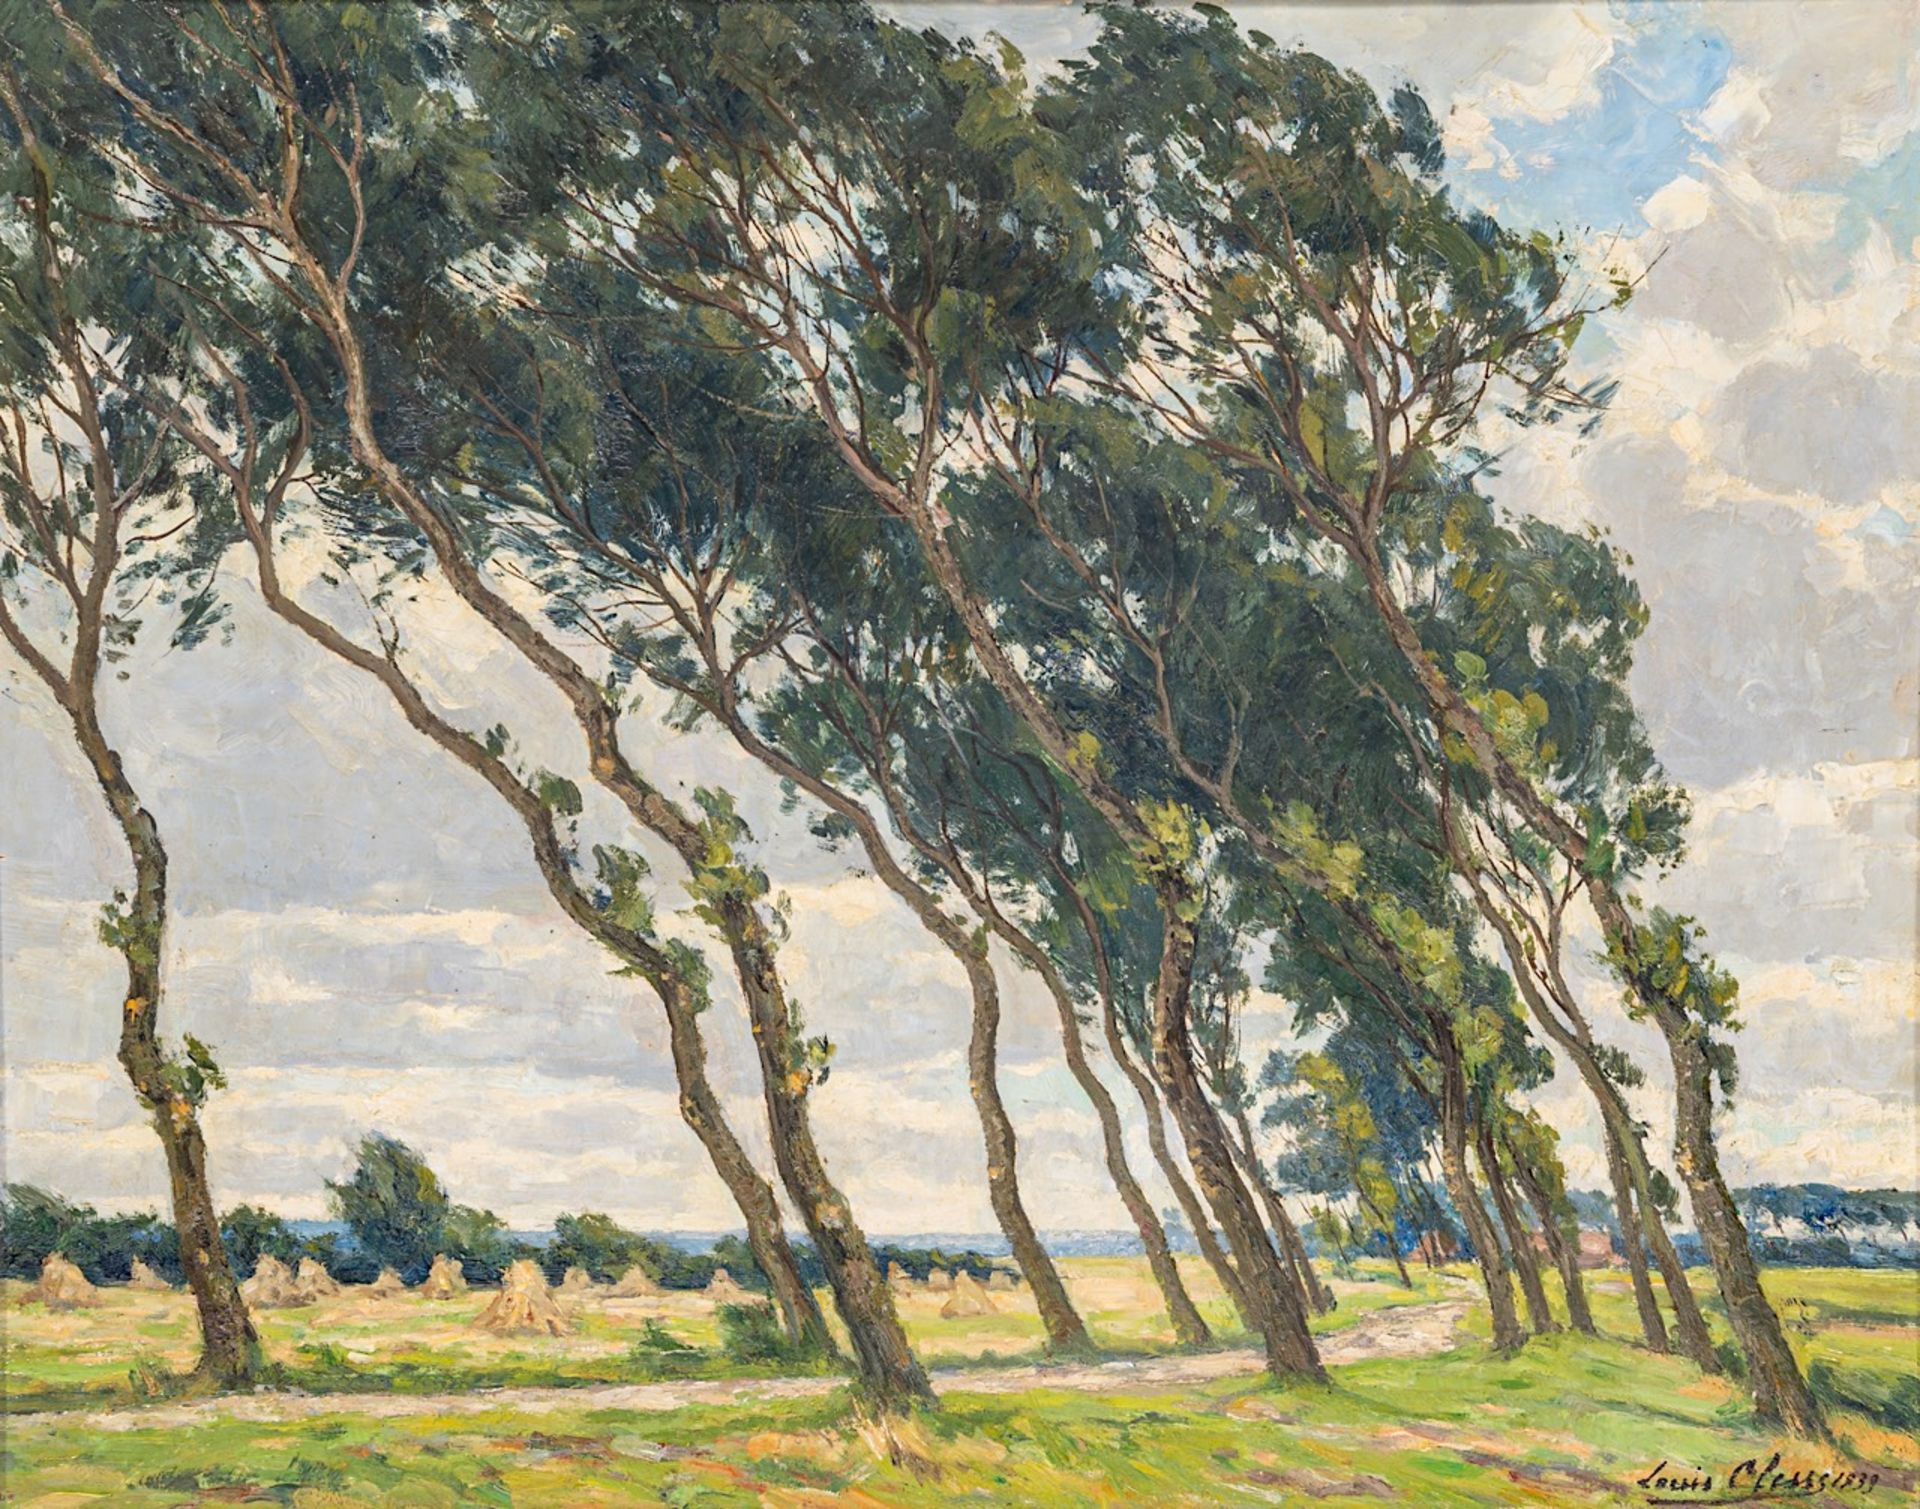 Louis Clesse (1889-1961), landscape with trees, 1939, oil on panel 60 x 75 cm. (23.6 x 29.5 in.), Fr - Image 8 of 10